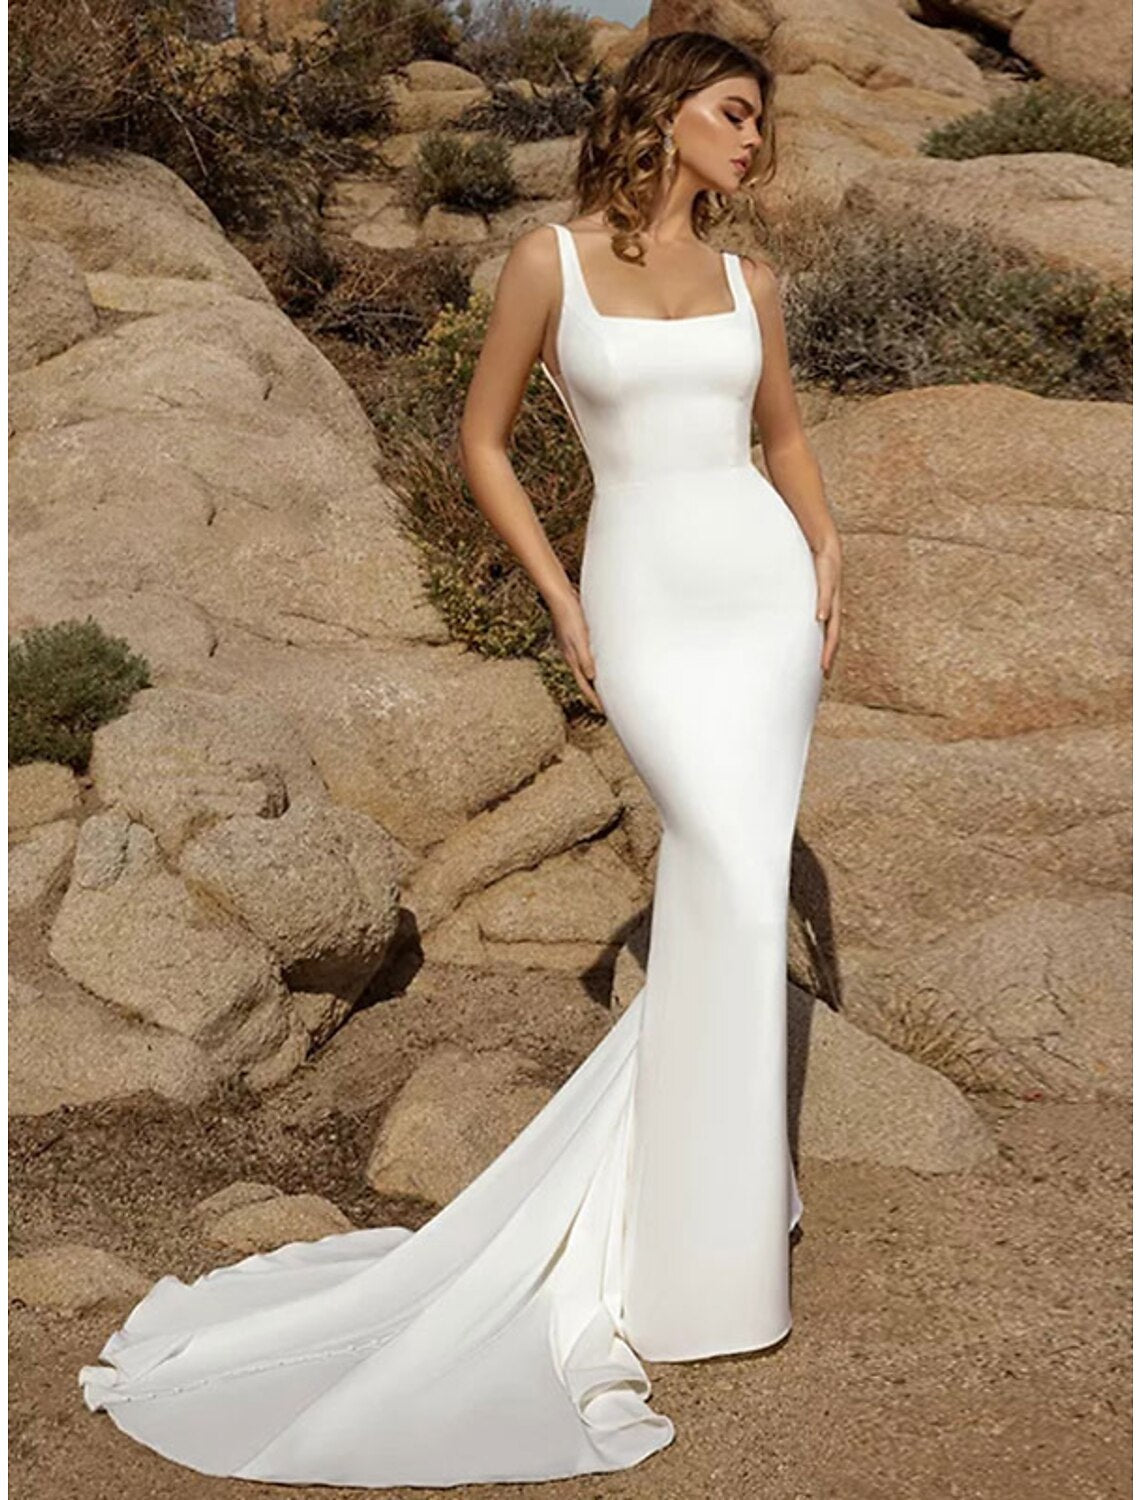 Beach Open Back Casual Wedding Dresses Mermaid / Trumpet Square Neck Sleeveless Court Train Stretch Fabric Bridal Gowns With Buttons Solid Color